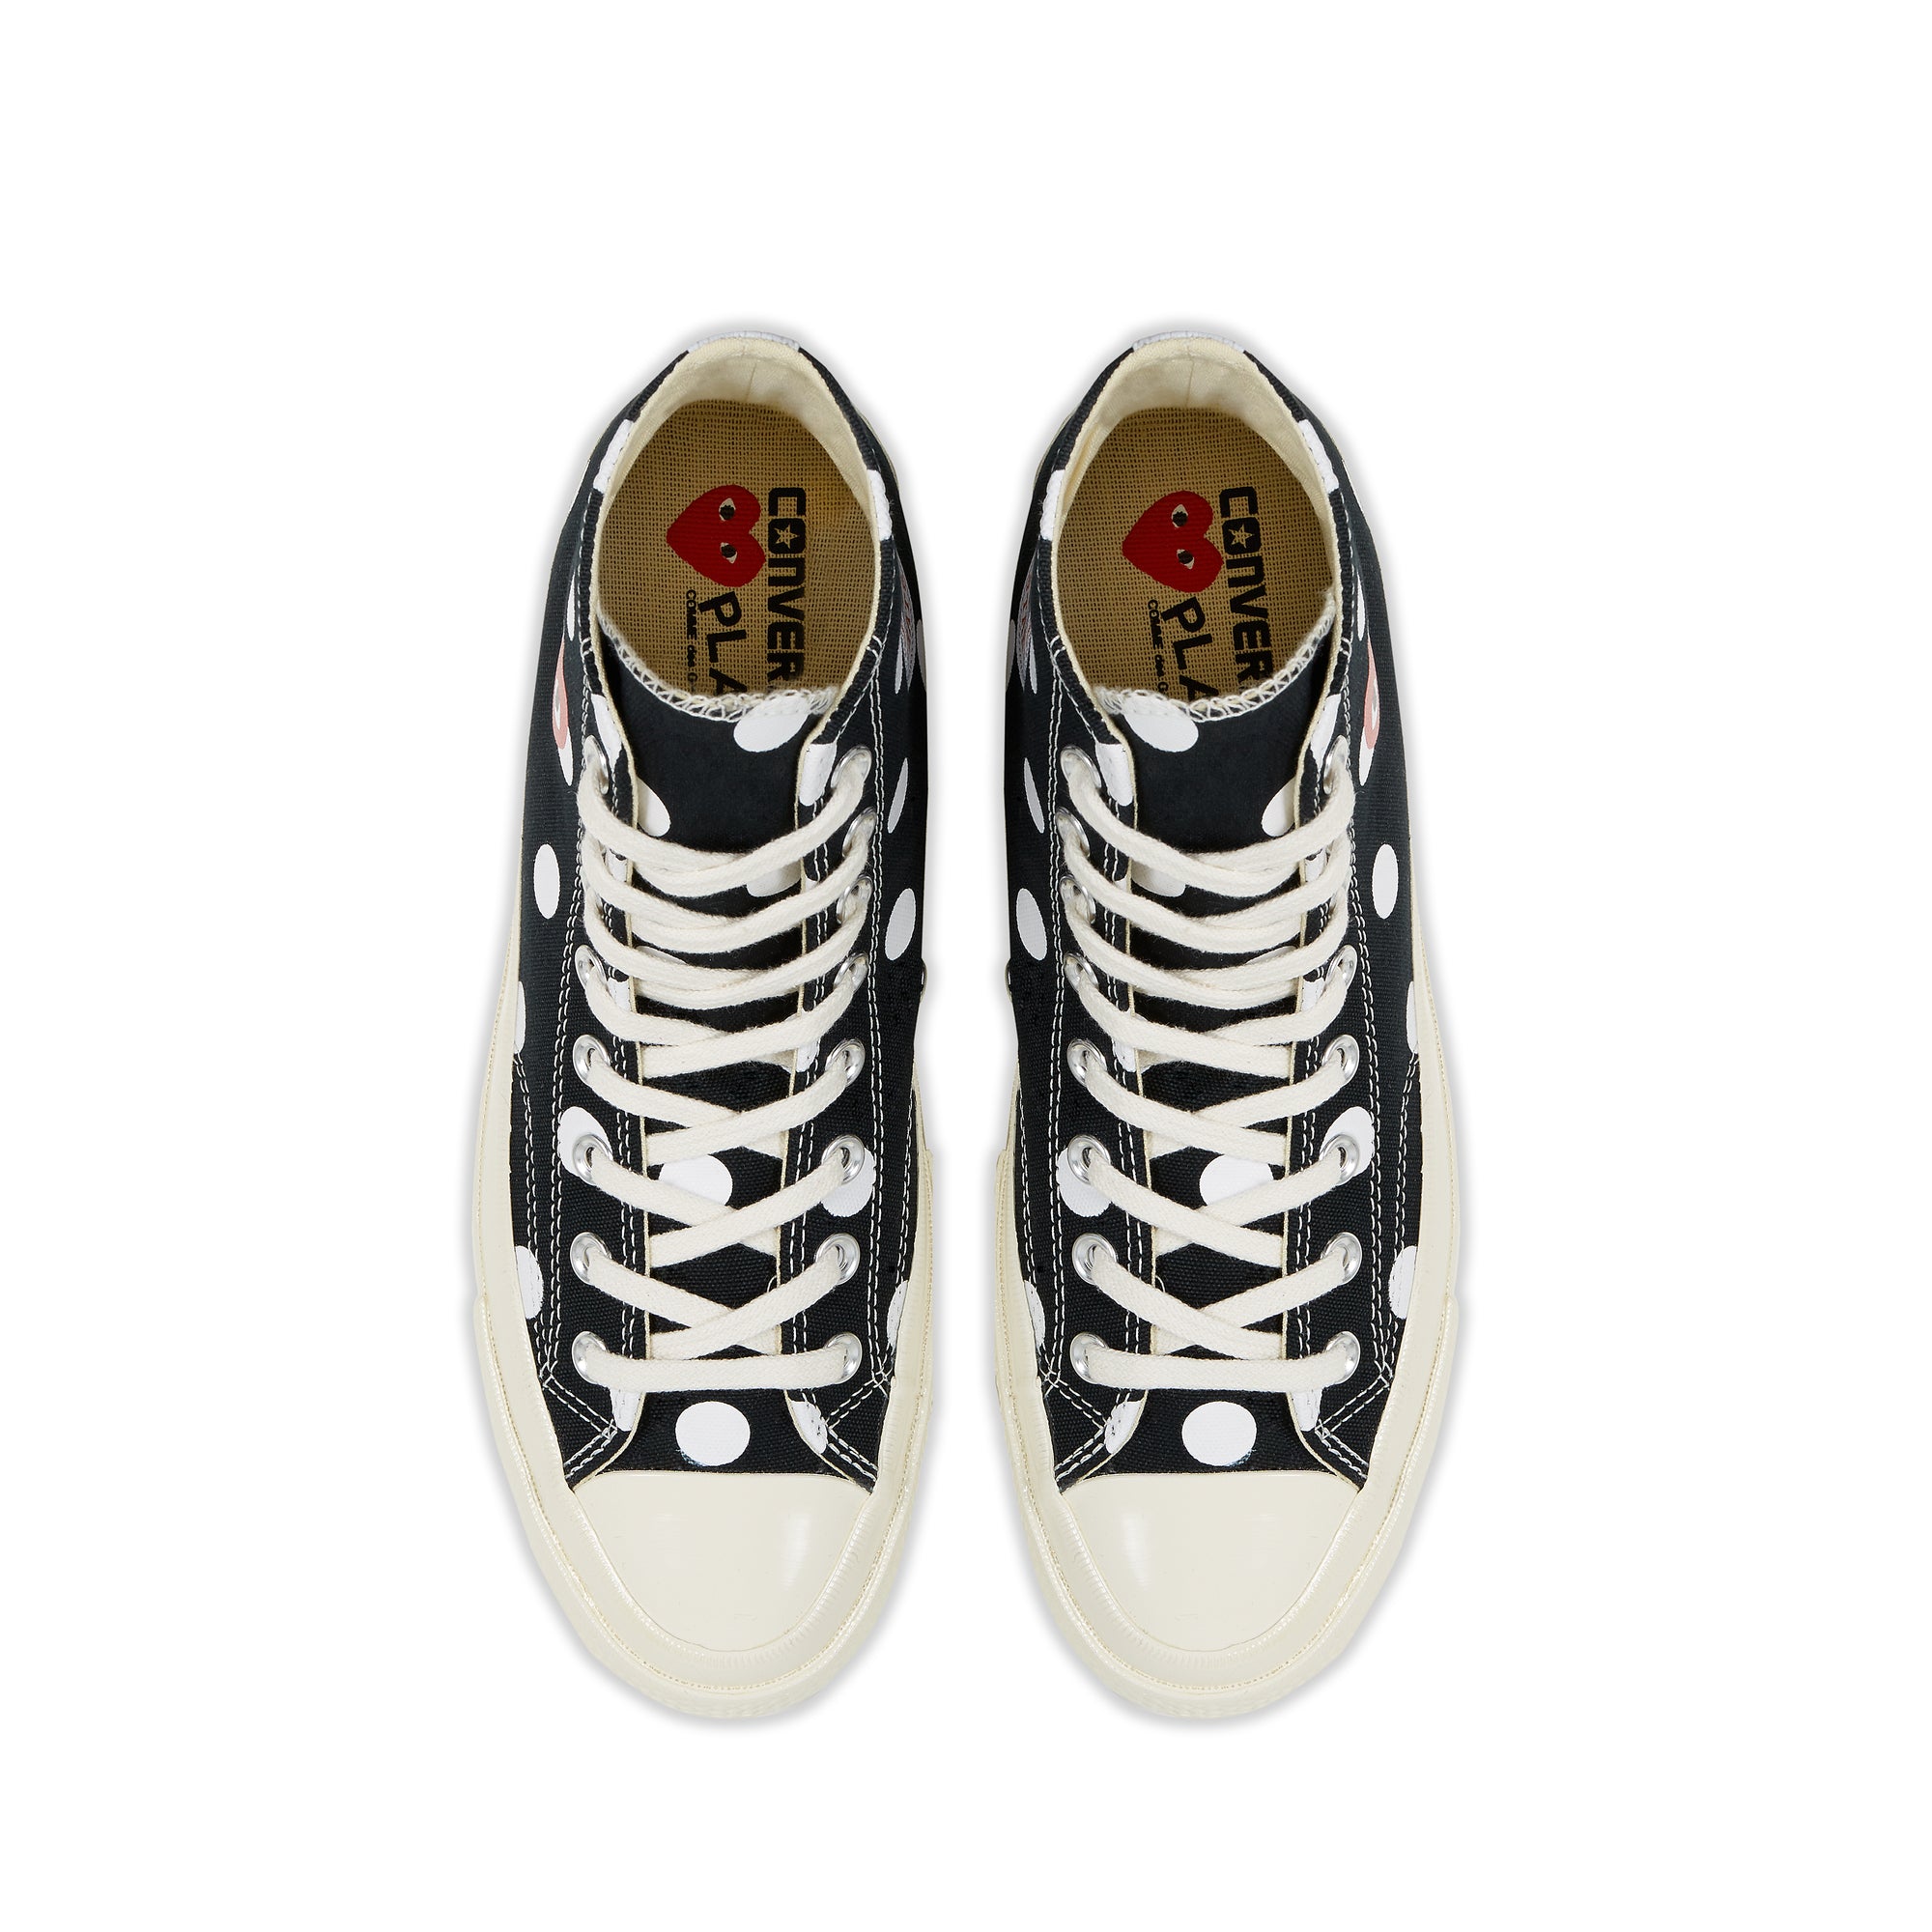 Play Converse - Polka Dot Red Heart Chuck Taylor All Star ’70 High Sneakers - (Black) view 2